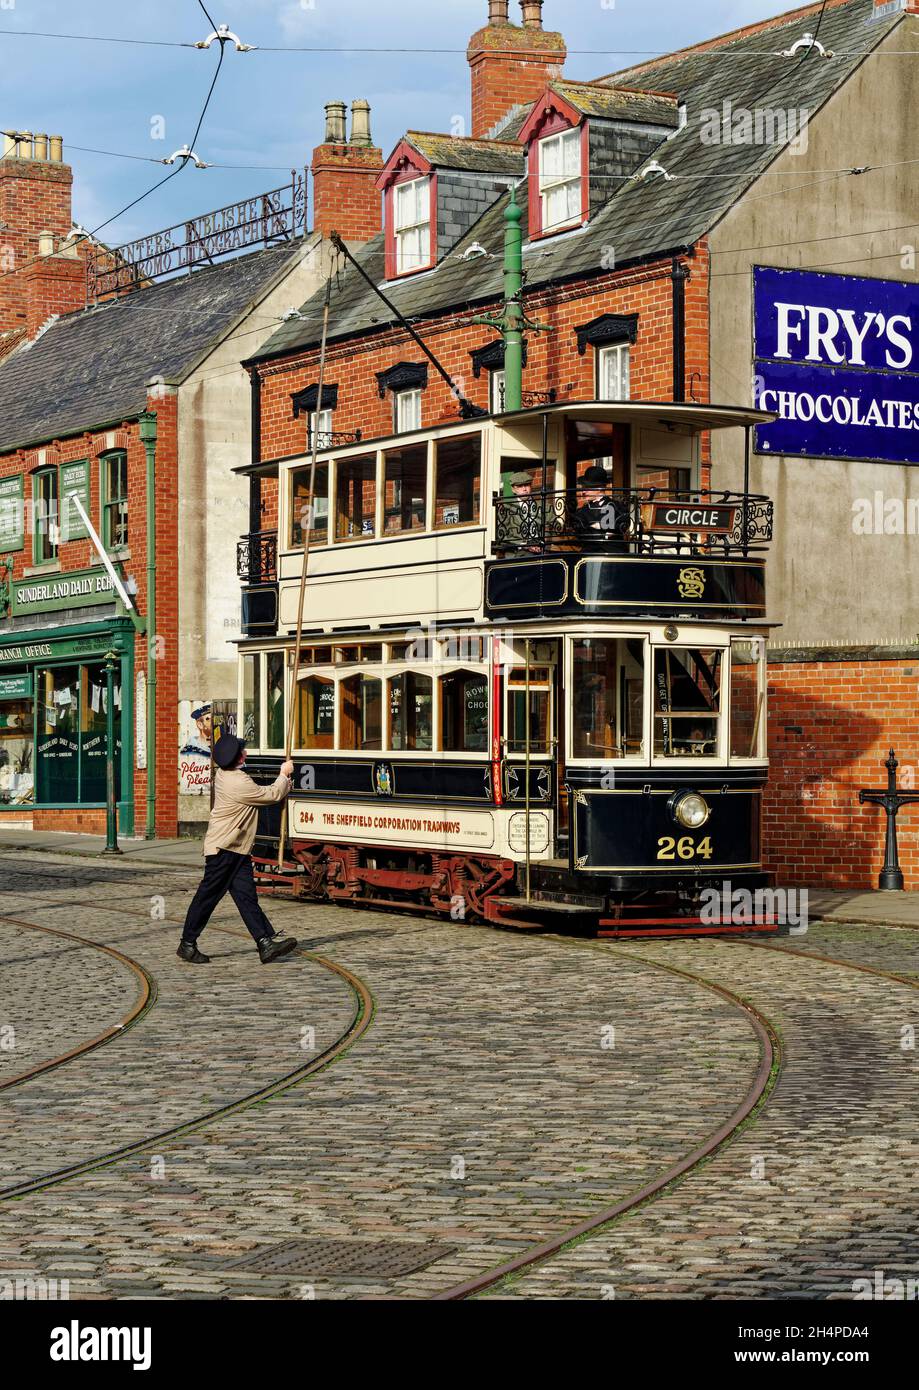 Restored Sheffield tram car recreates a 1900's street scene with people in period costume ain the town area of Beamish Museum, County Durham. Stock Photo